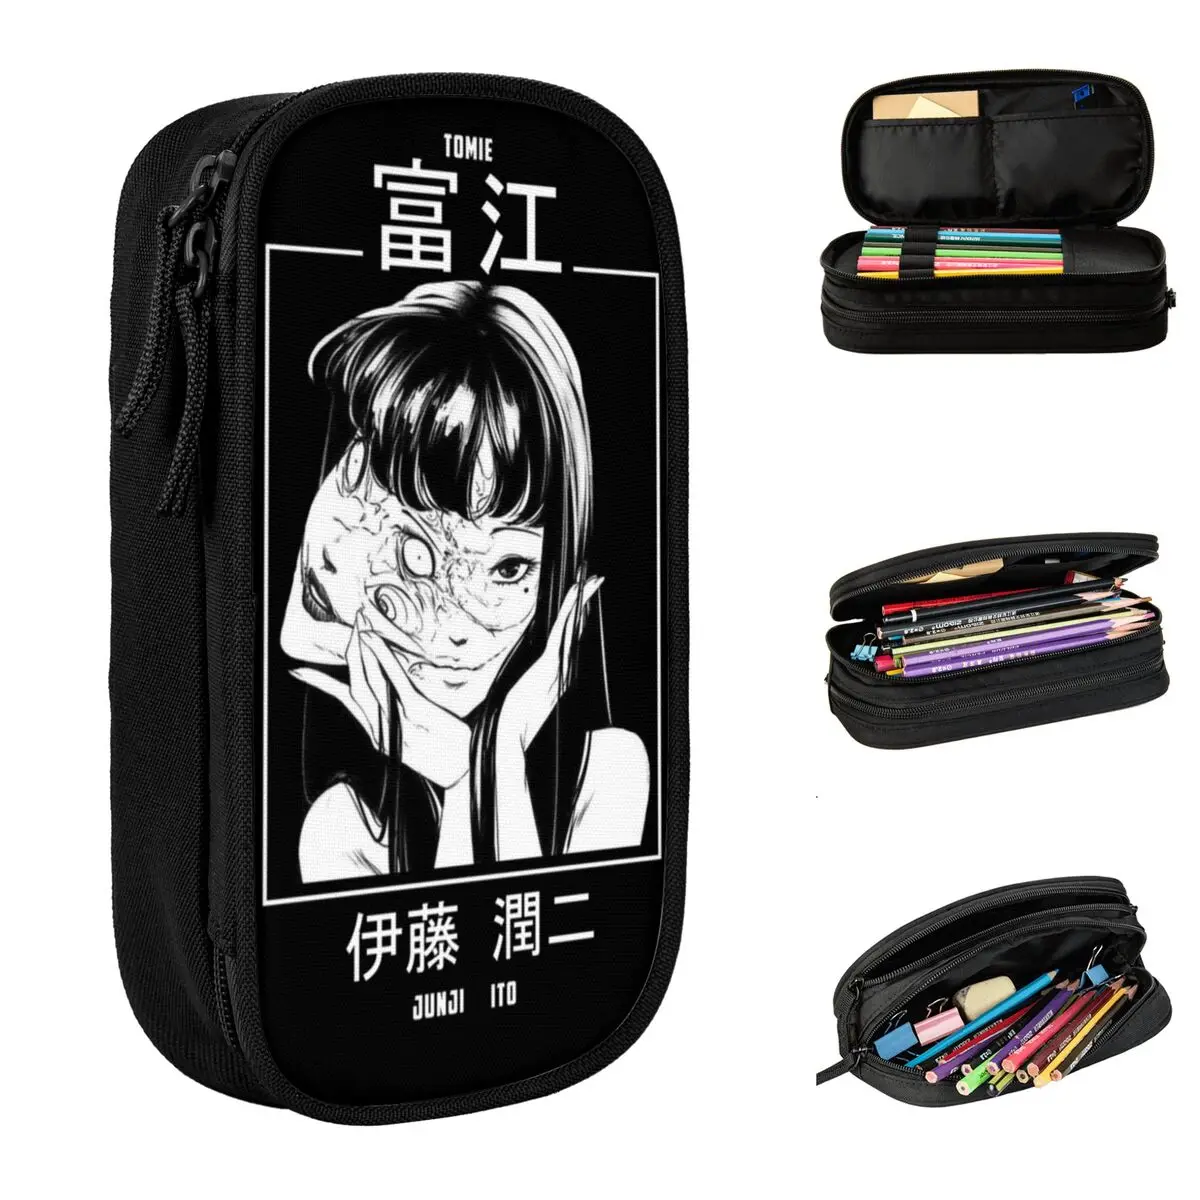 Junji Ito Tomie Pencil Cases New Japanese Horror Manga Comic Pen Holder Bags Girl Boy Large Storage School Gift Pencilcases